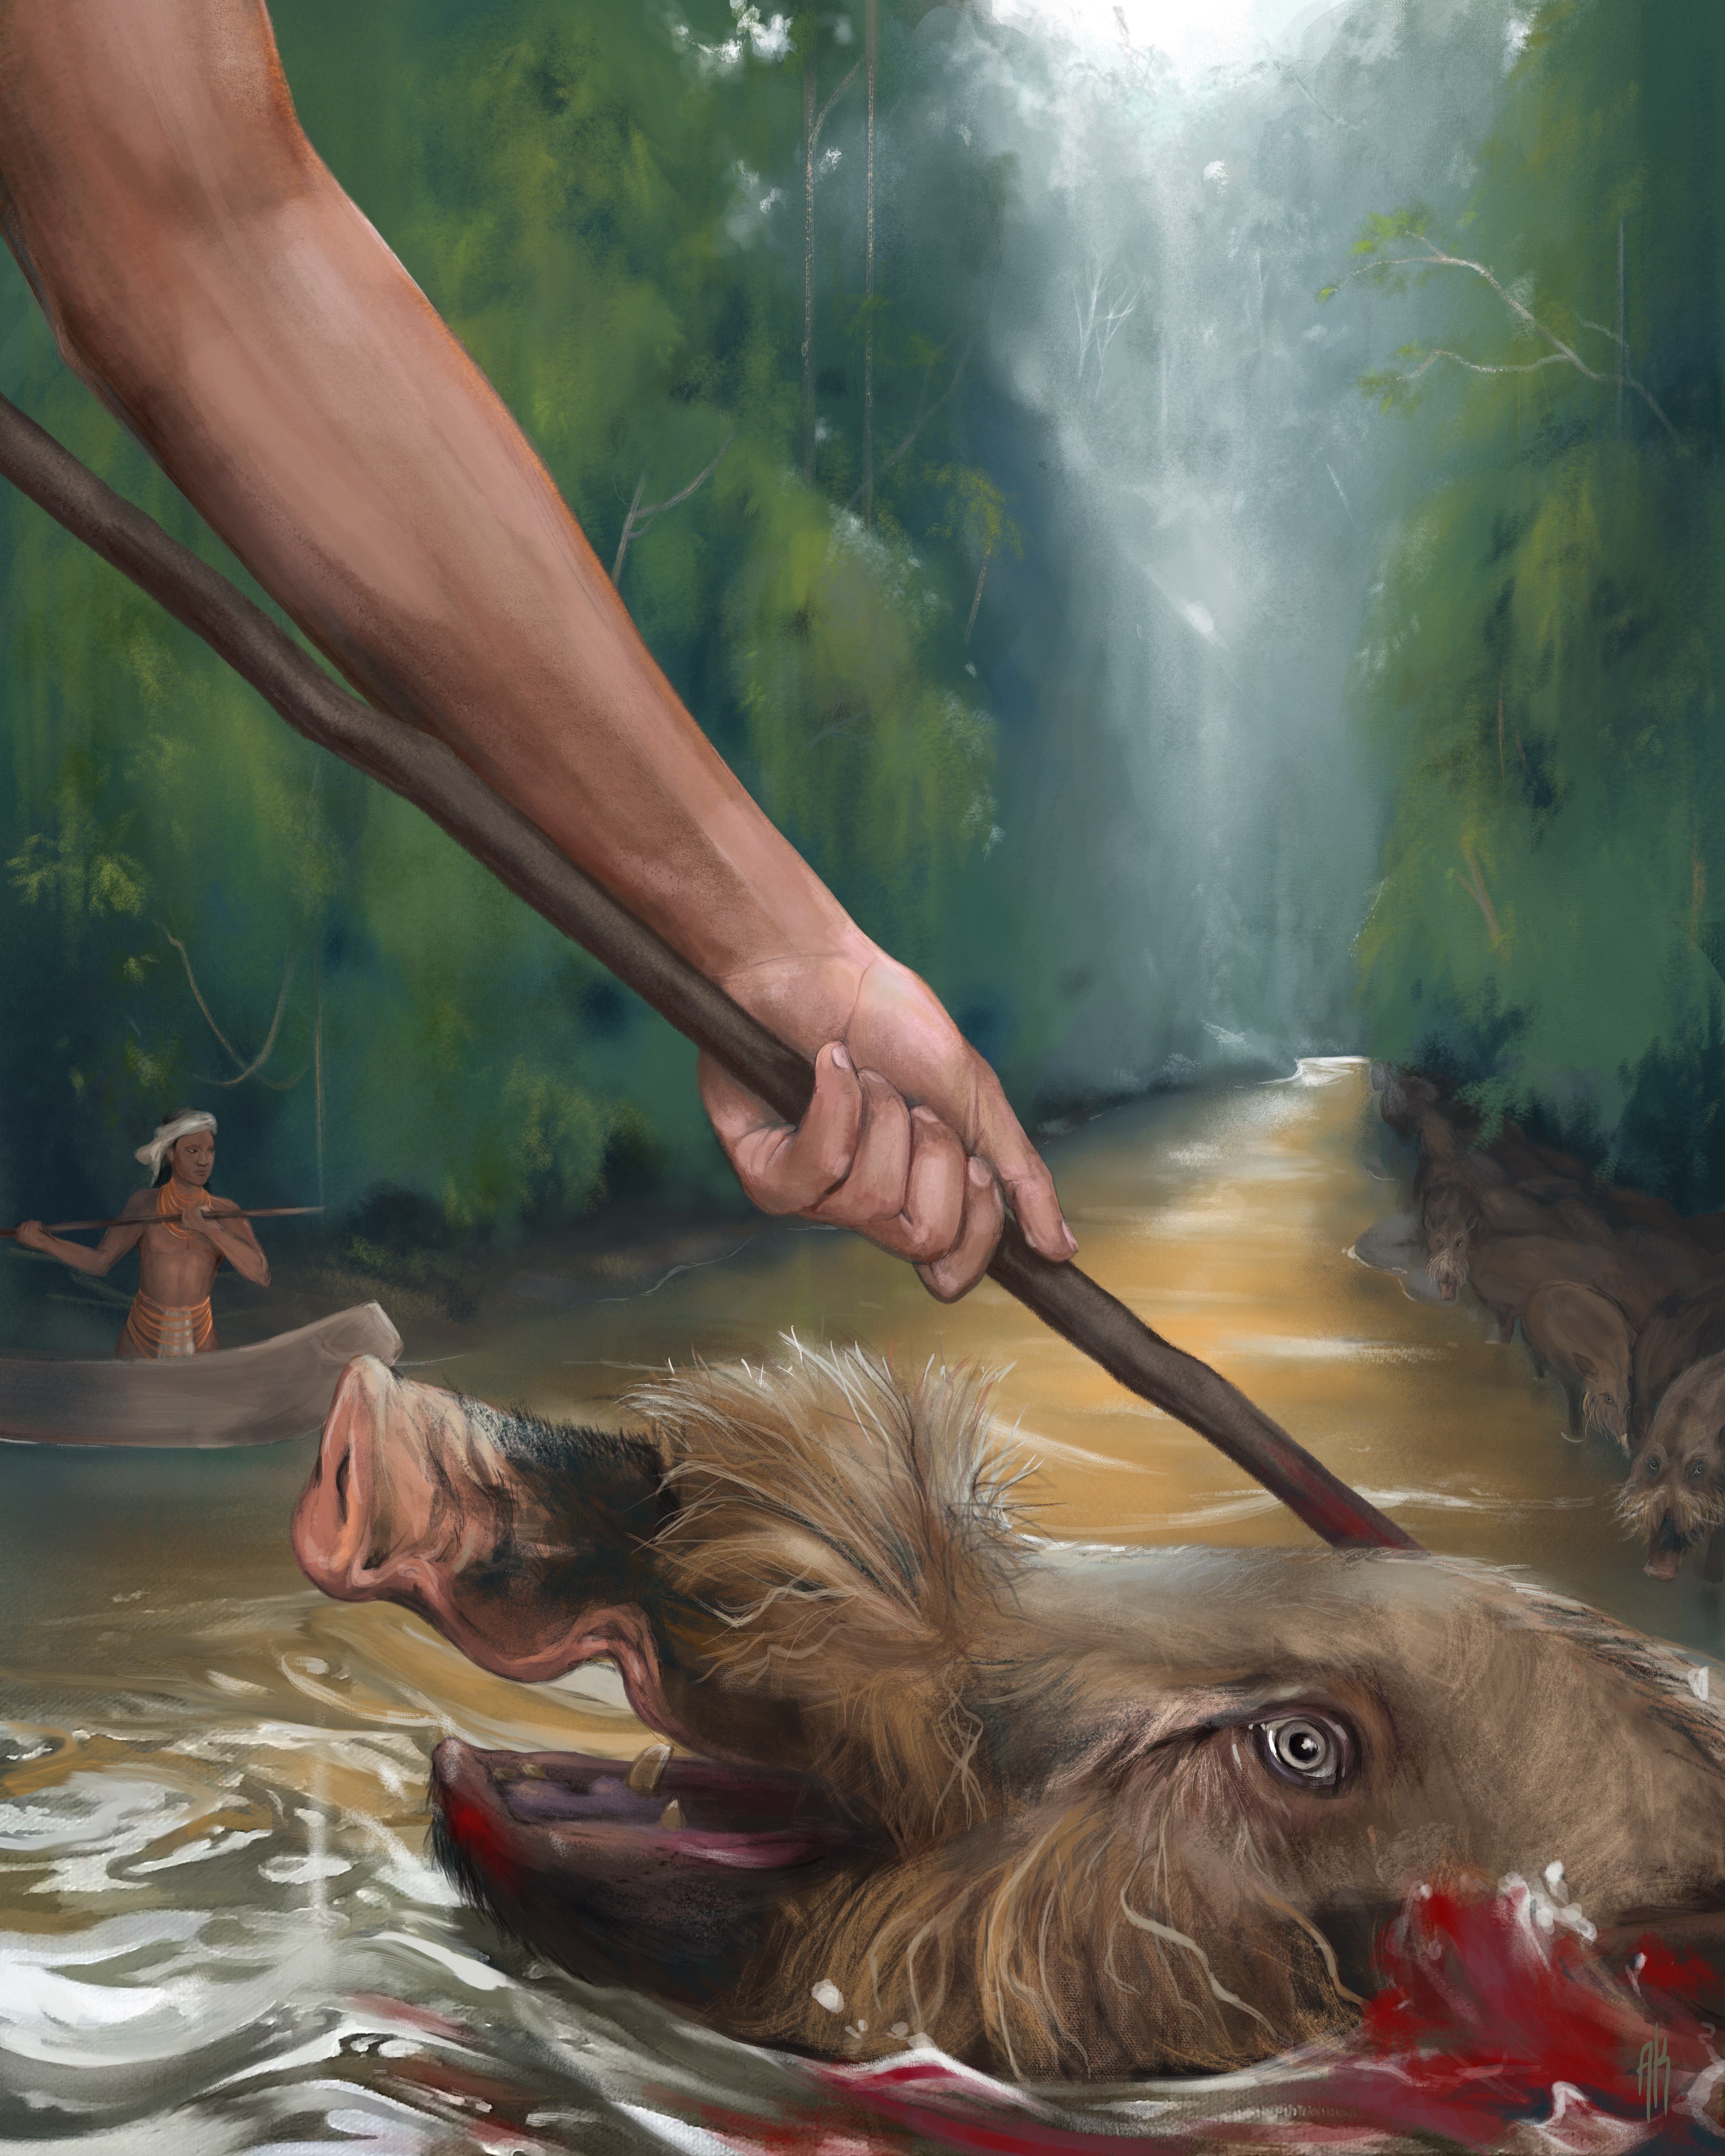 An artistic depiction of a traditional form of Indigenous bearded pig hunting, showing hunters spearing a pig in a river